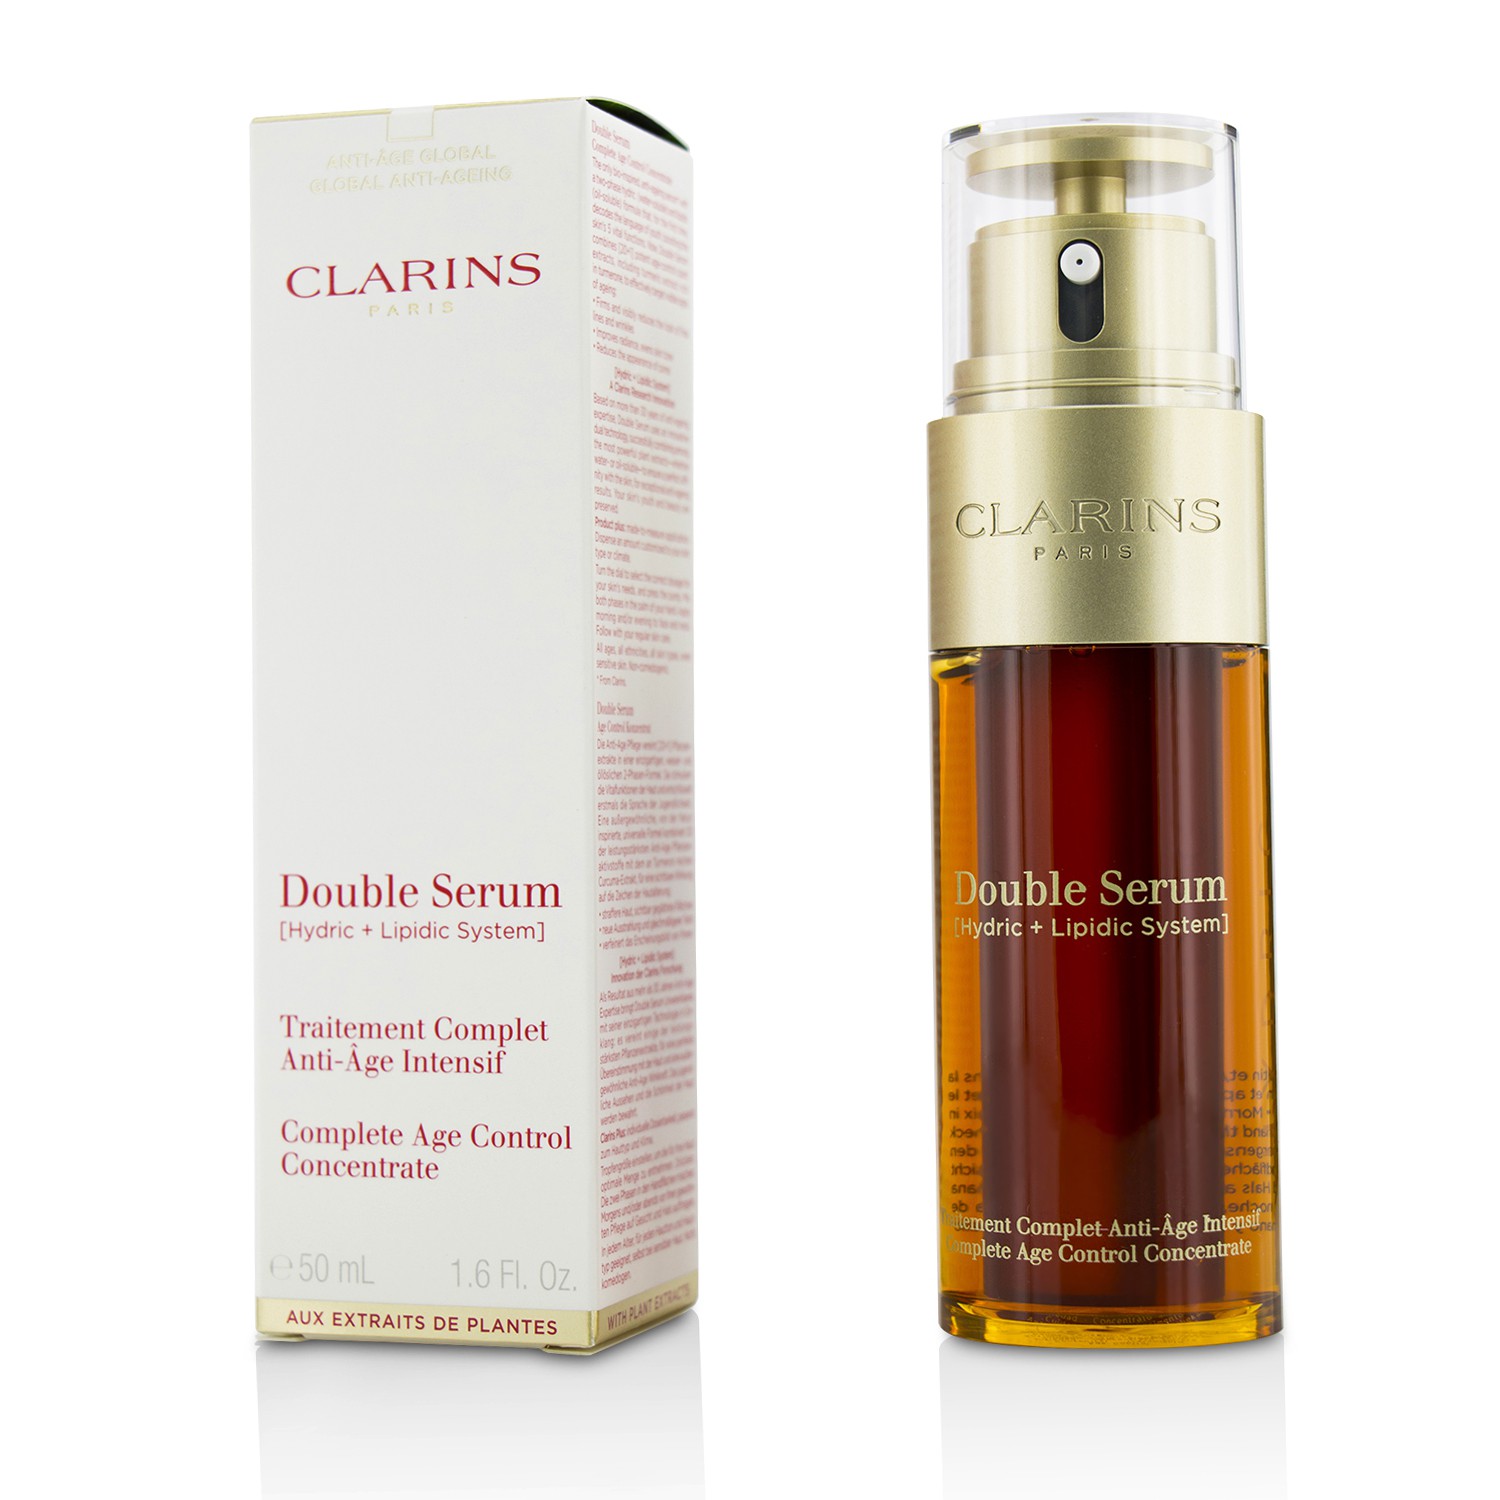 Double Serum (Hydric + Lipidic System) Complete Age Control Concentrate Clarins Image